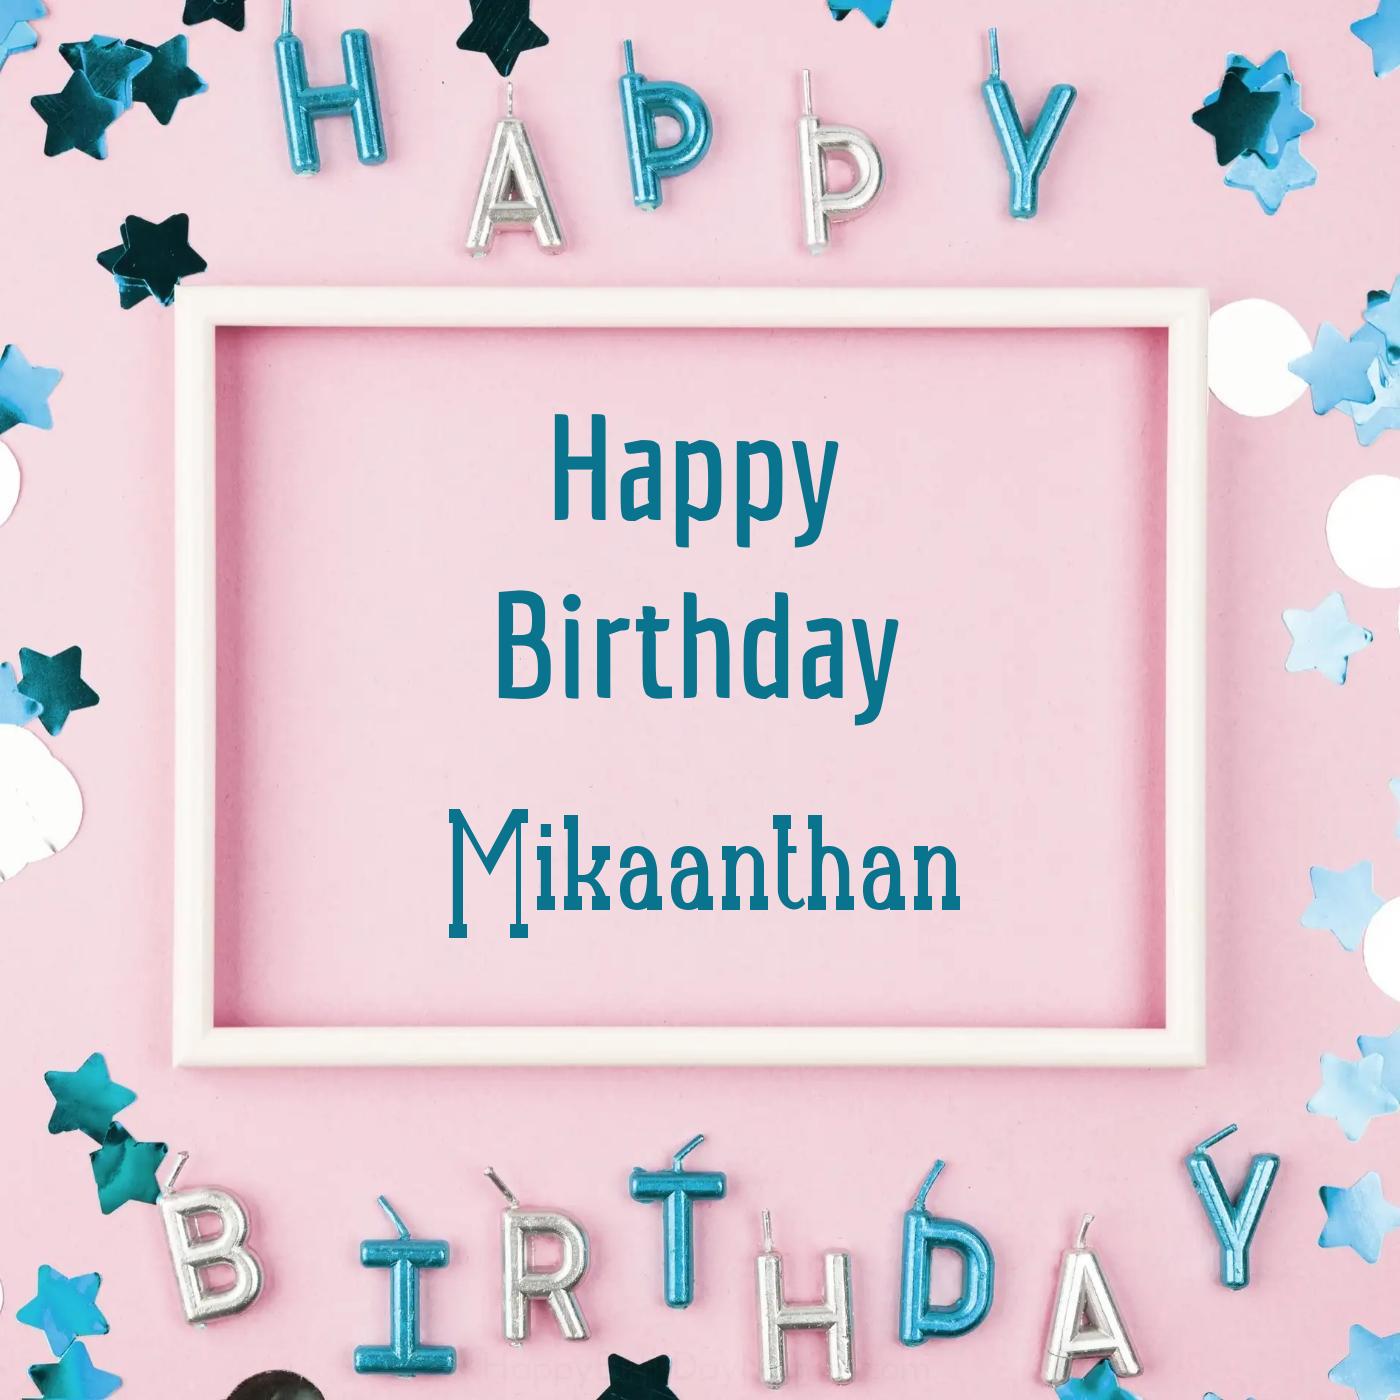 Happy Birthday Mikaanthan Pink Frame Card